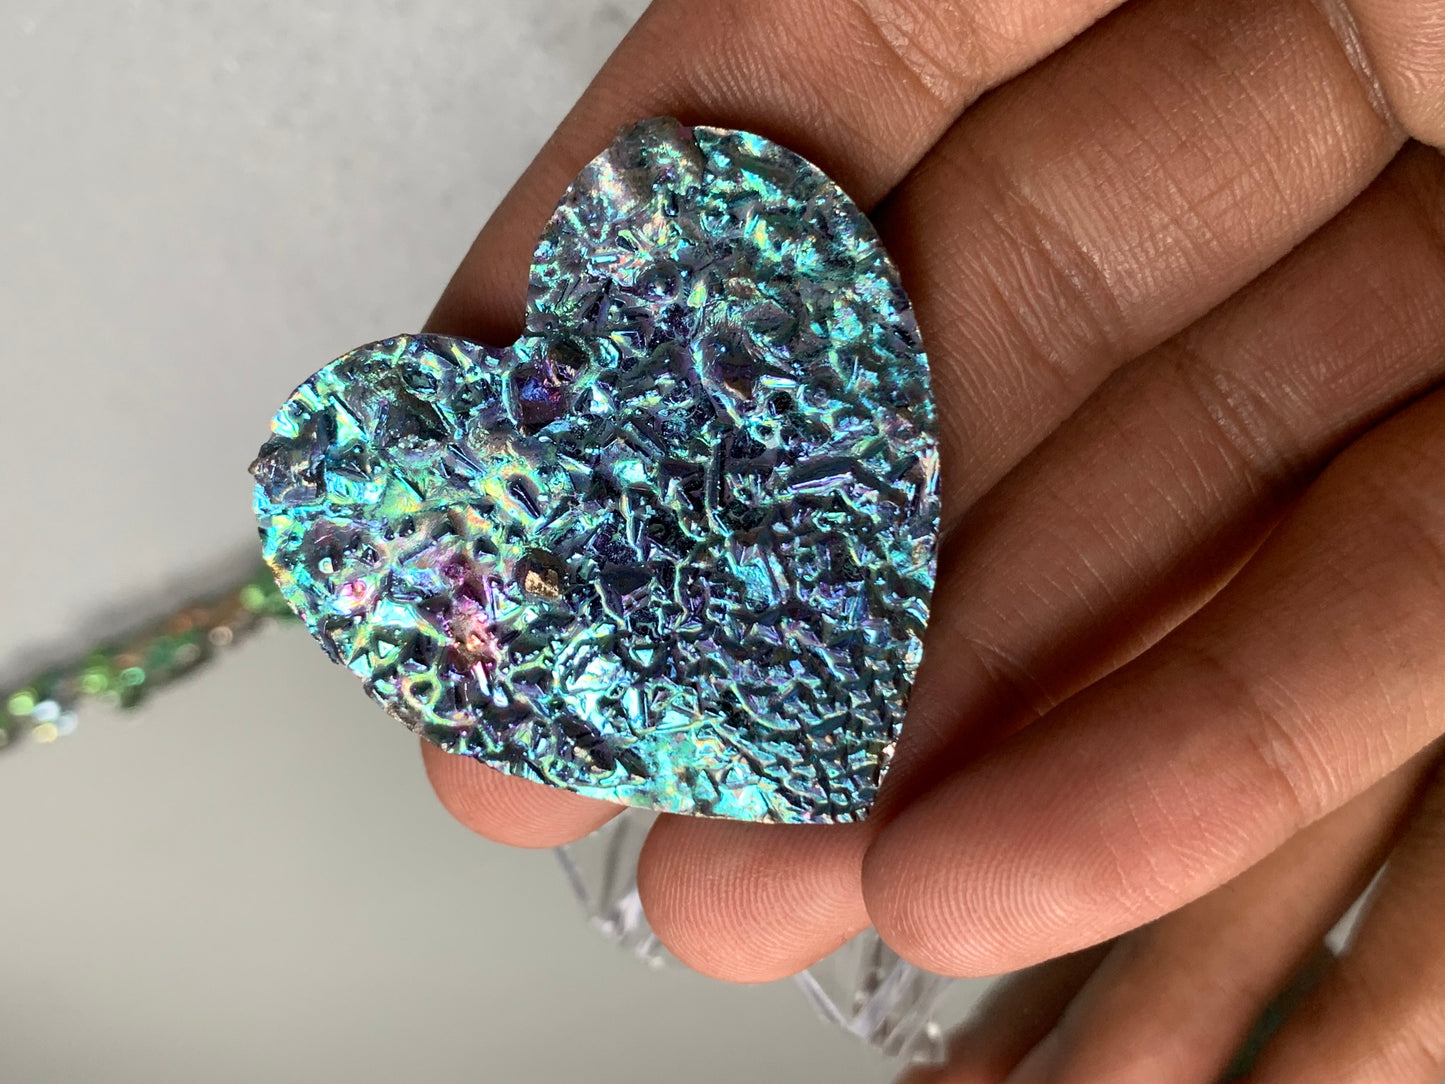 Blue Bismuth Crystal Heart Cut Out Metal Art